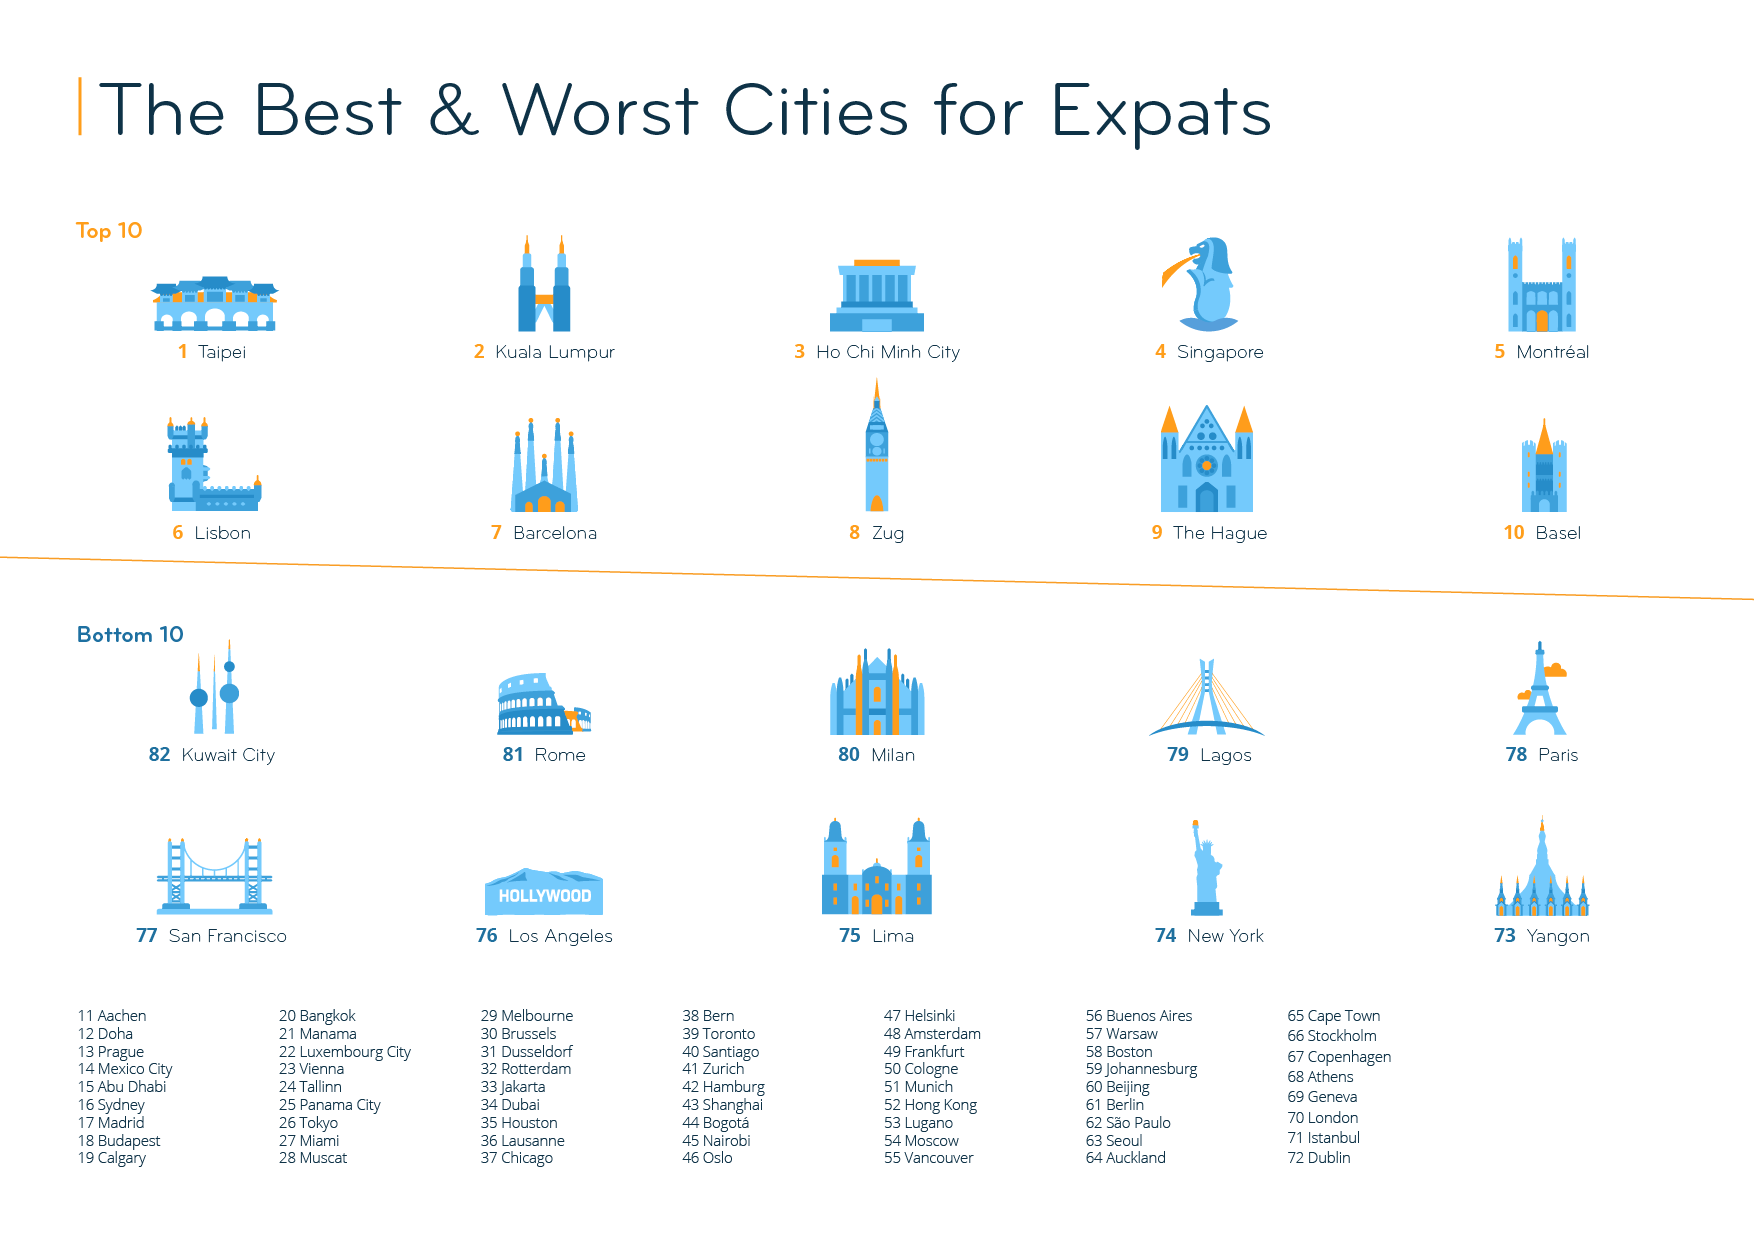 What do you think of these rankings of the best and worst city